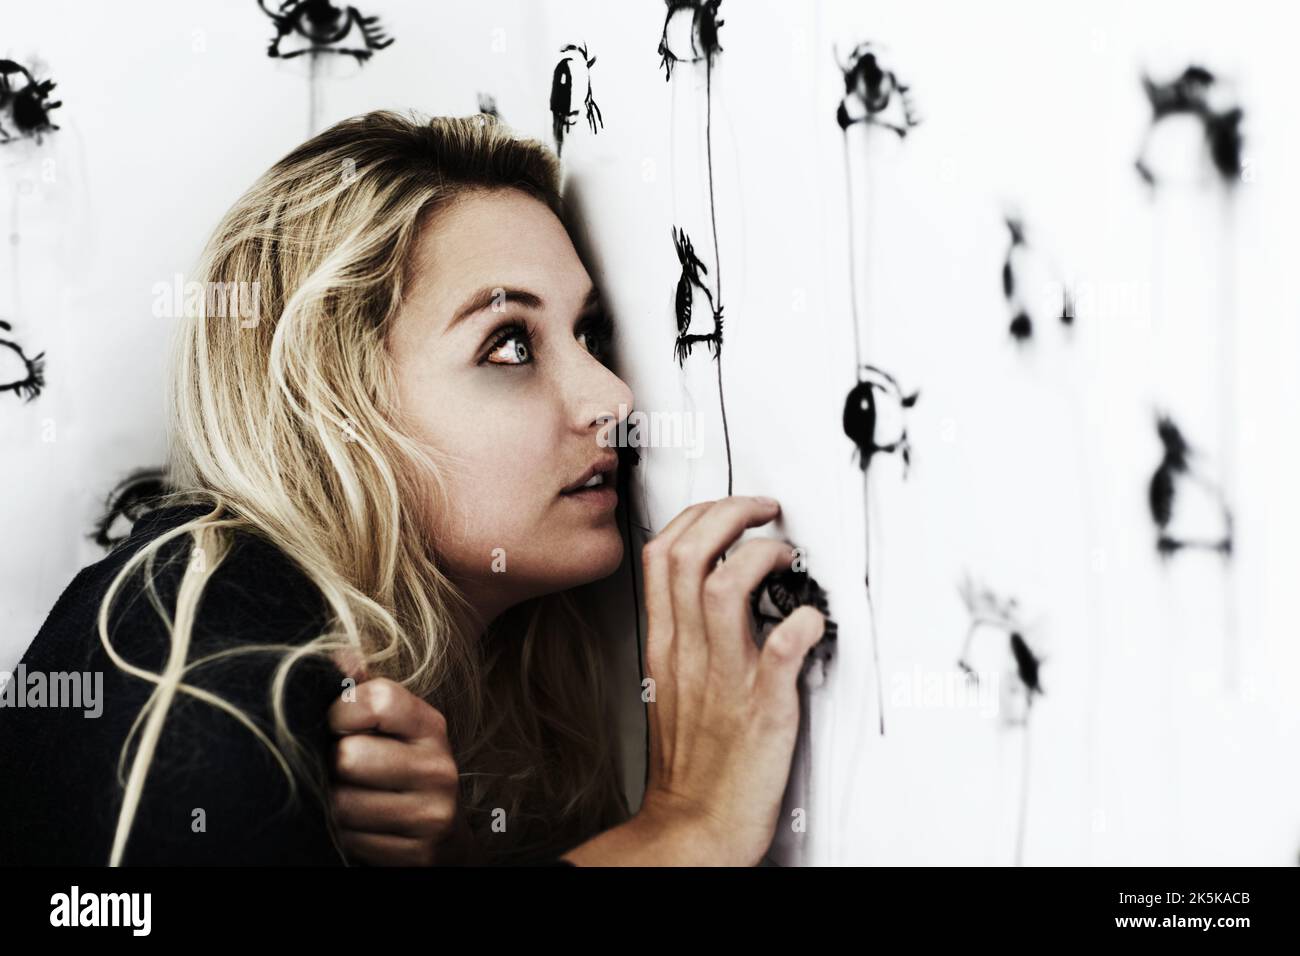 Theyre everywhere...Studio shot of a paranoid young woman looking at painted eyes on a wall. Stock Photo